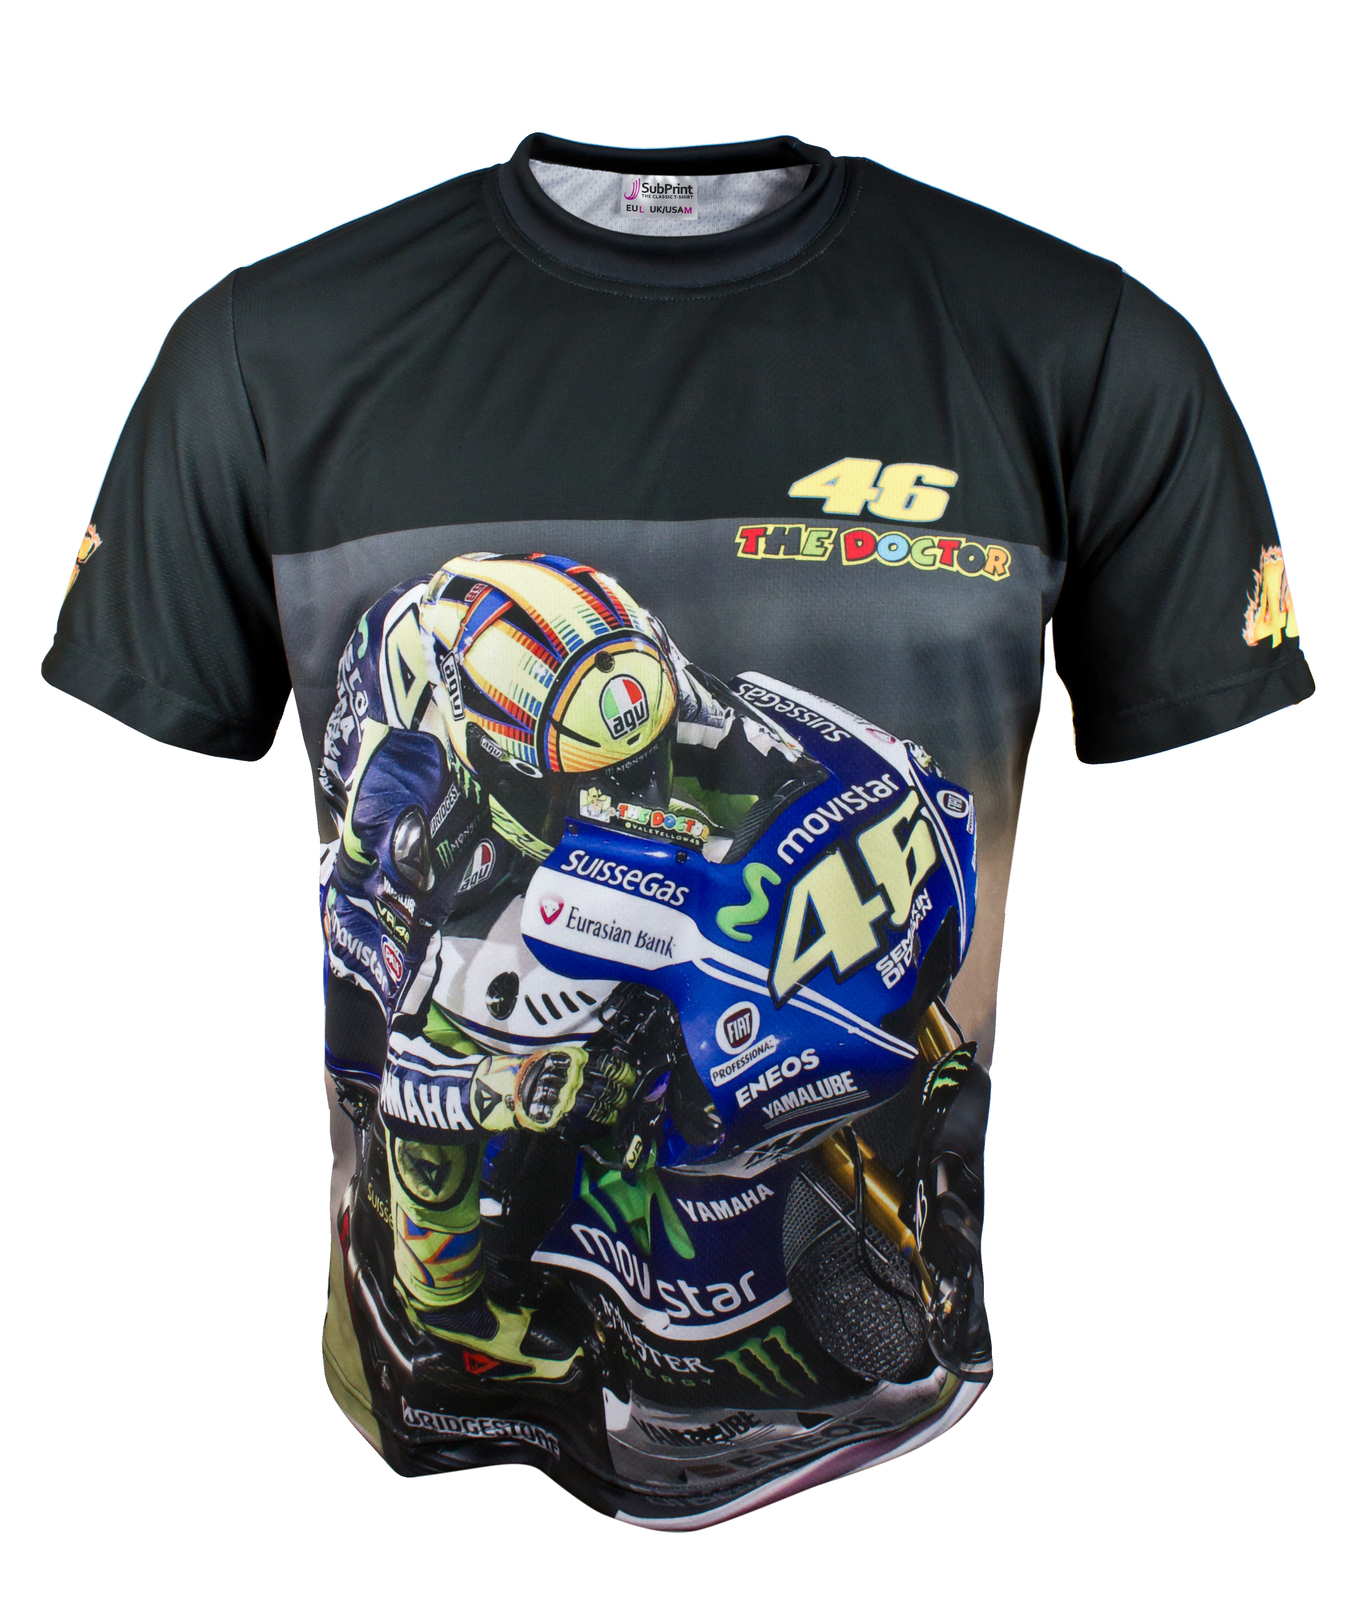 Primary image for 46 The Doctor Motor Fan T-Shirt Motorsports  Racing Sports Top Gift New Fashion 